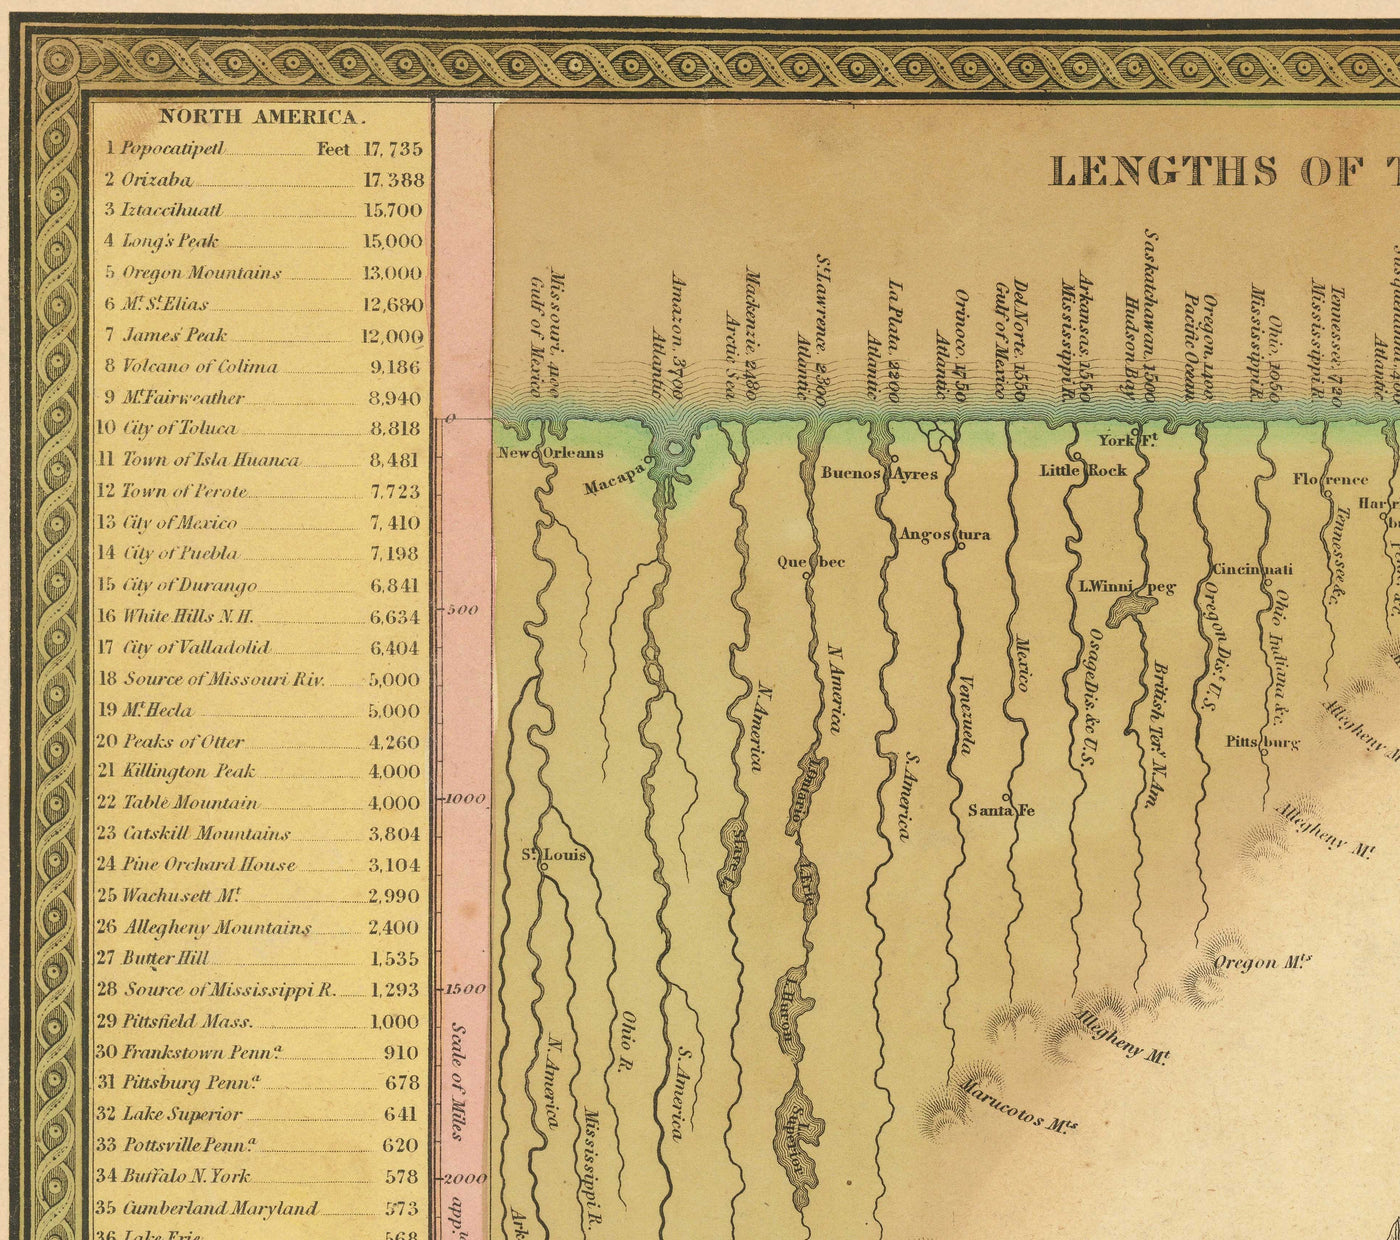 Old Chart of The World's Rivers and Mountains, 1849 by Samuel Augustus Mitchell - Nile, Mississippi, Mount Sorato, Mount Blanc, No Mount Everest